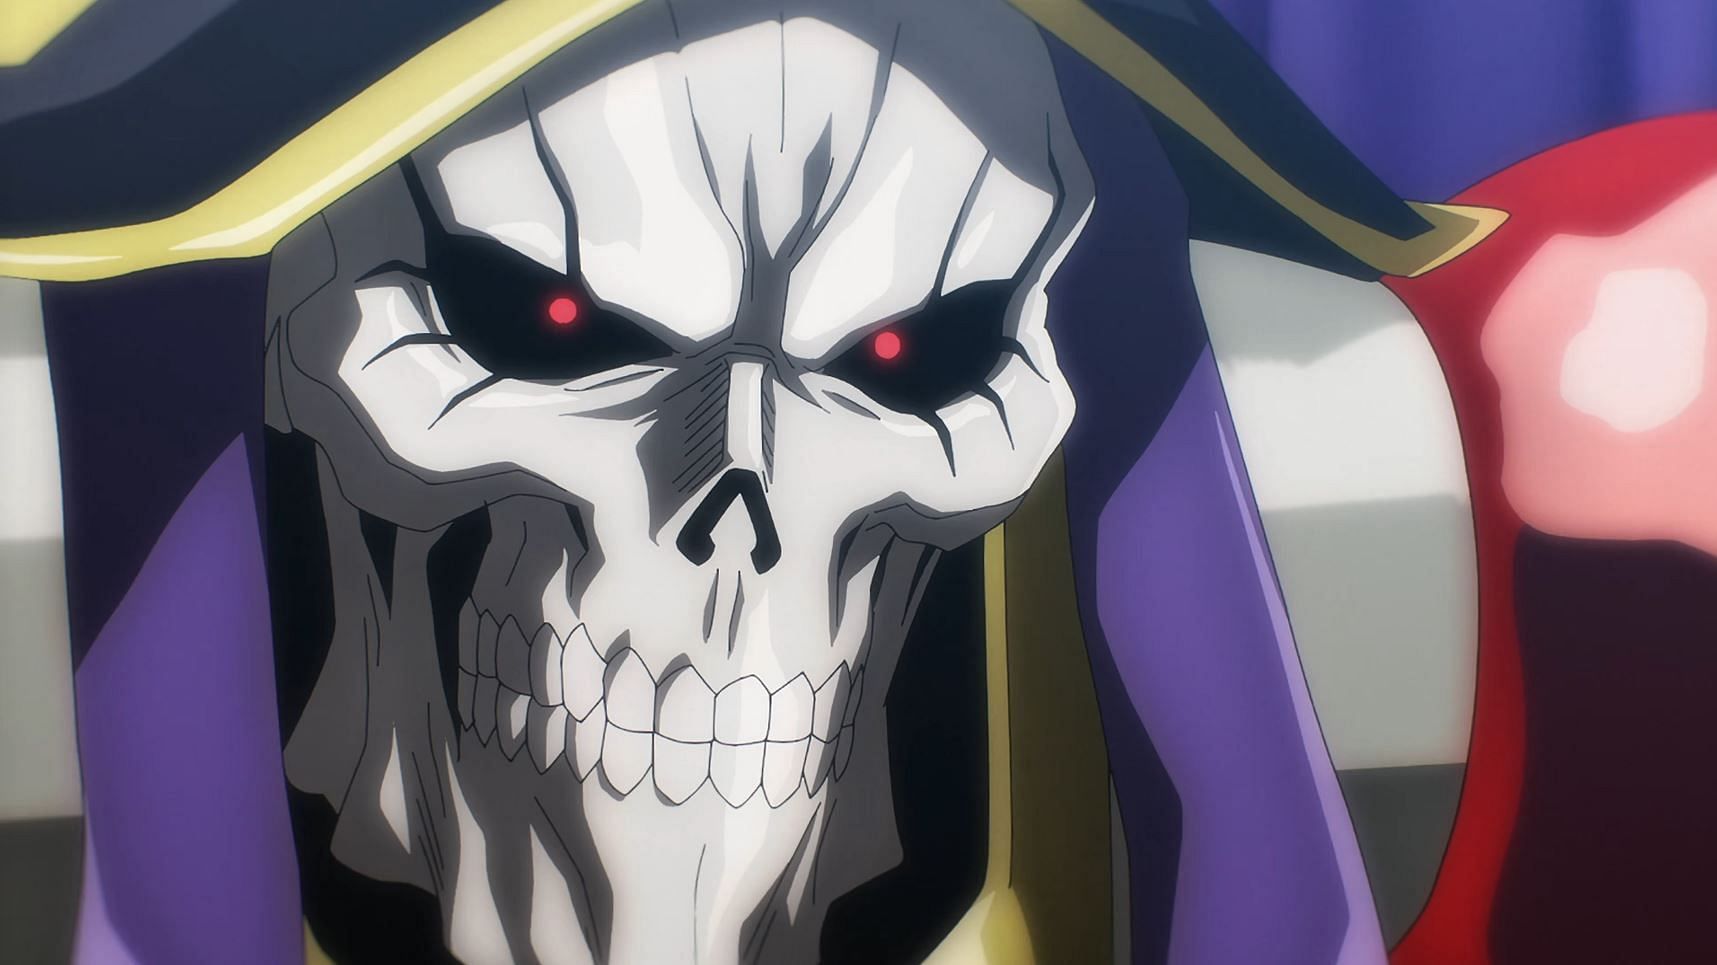 Episode 11 - Overlord IV - Anime News Network